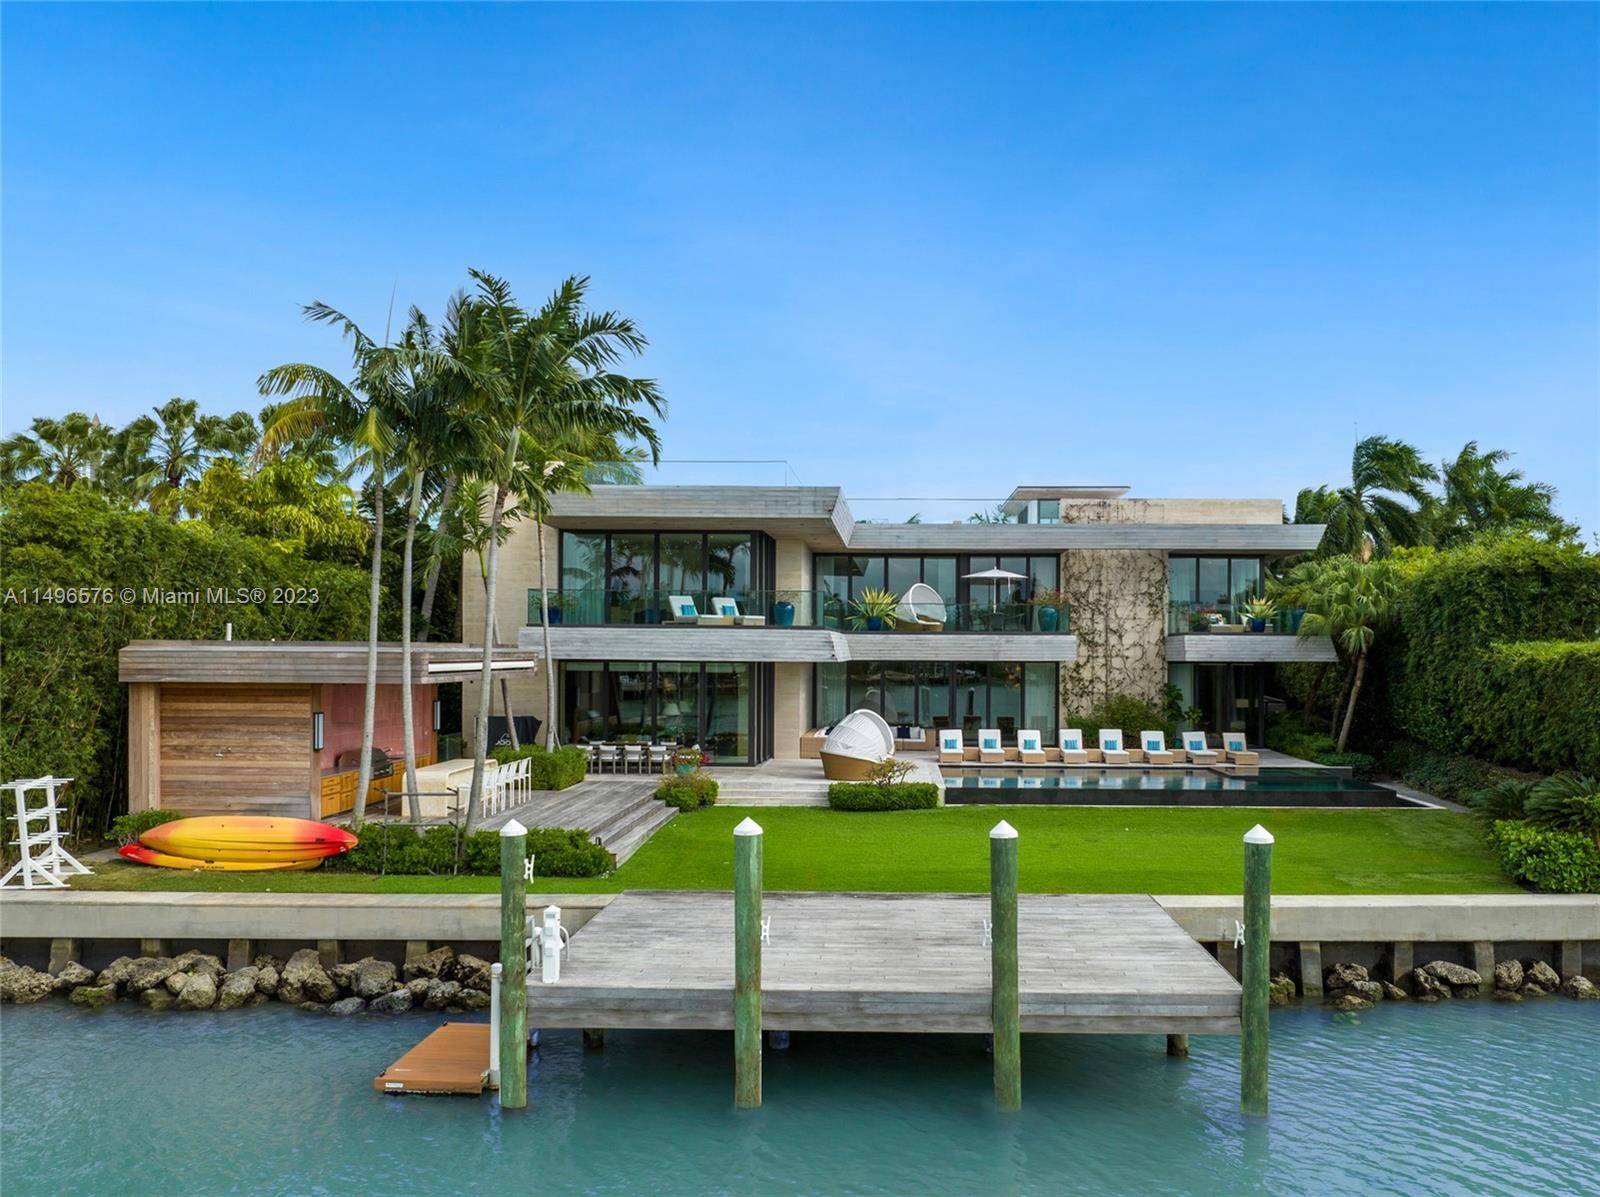 This waterfront estate on prestigious North Bay Road is a masterpiece of ultra luxe tropical modernism.